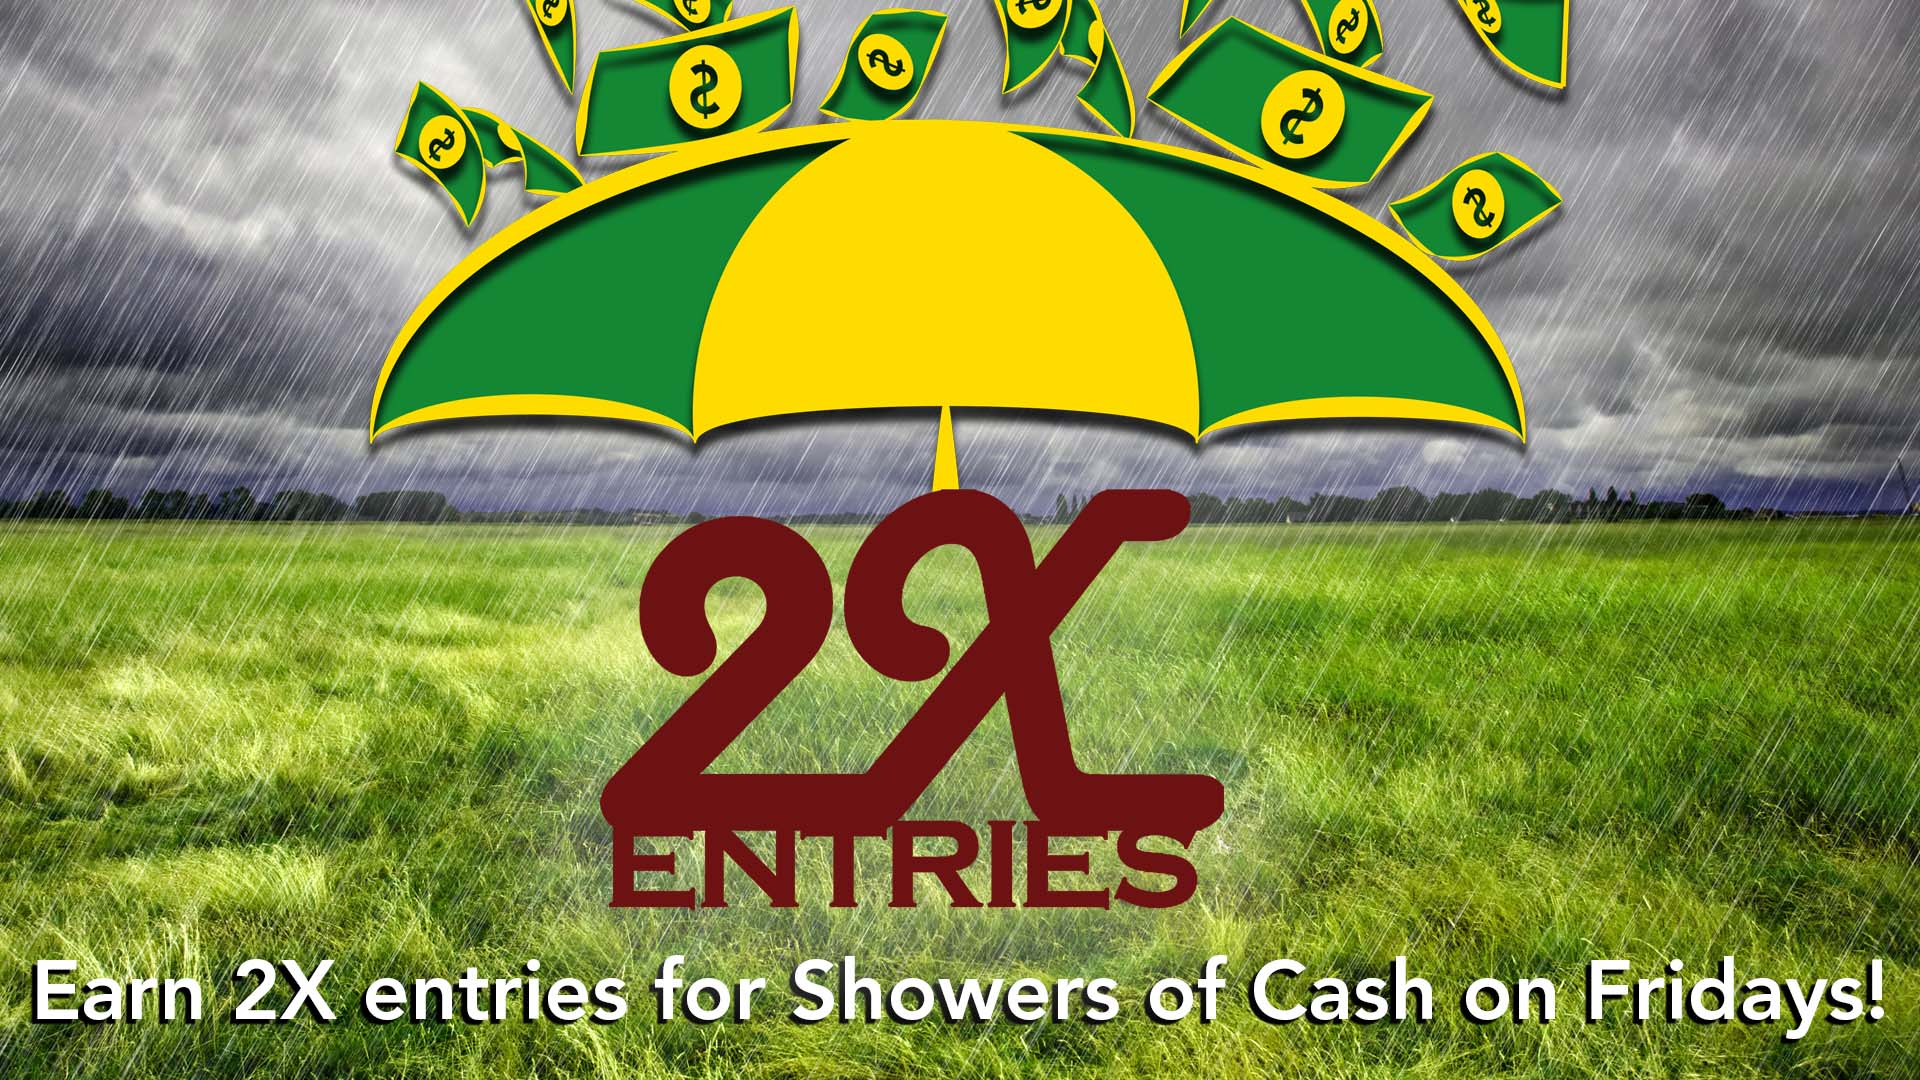 2x entries, earn entries, Showers of Cash, drawing, kwataqnuk, kwataqnuk resort drawing, casino, casino drawing, casino promotion, kwataqnuk promotion, cash drawing, cash